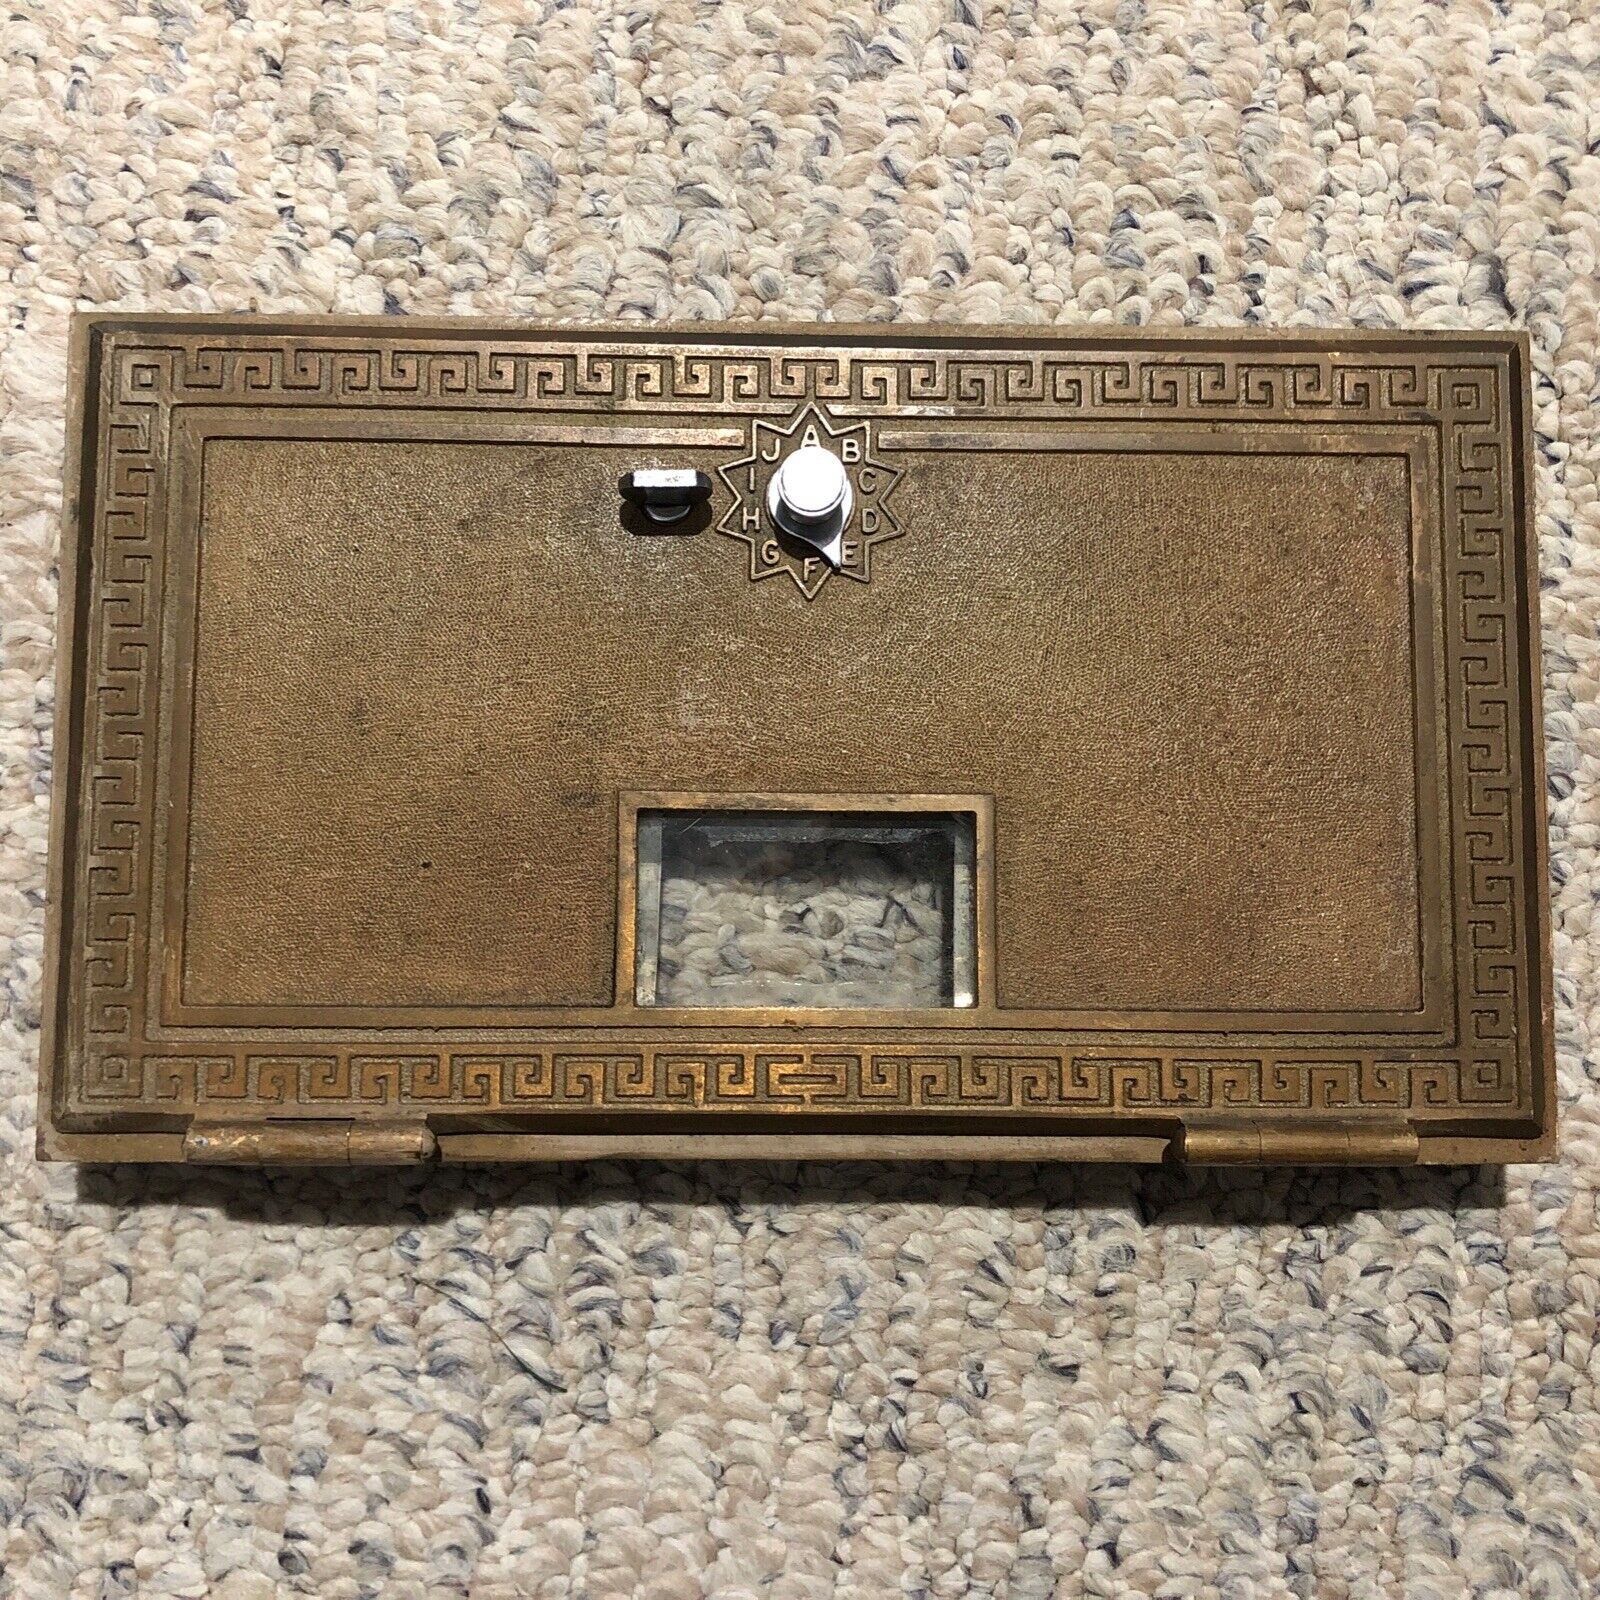 Bronze American Post Office Postal Mail Box Door Dial Combination Large 1958